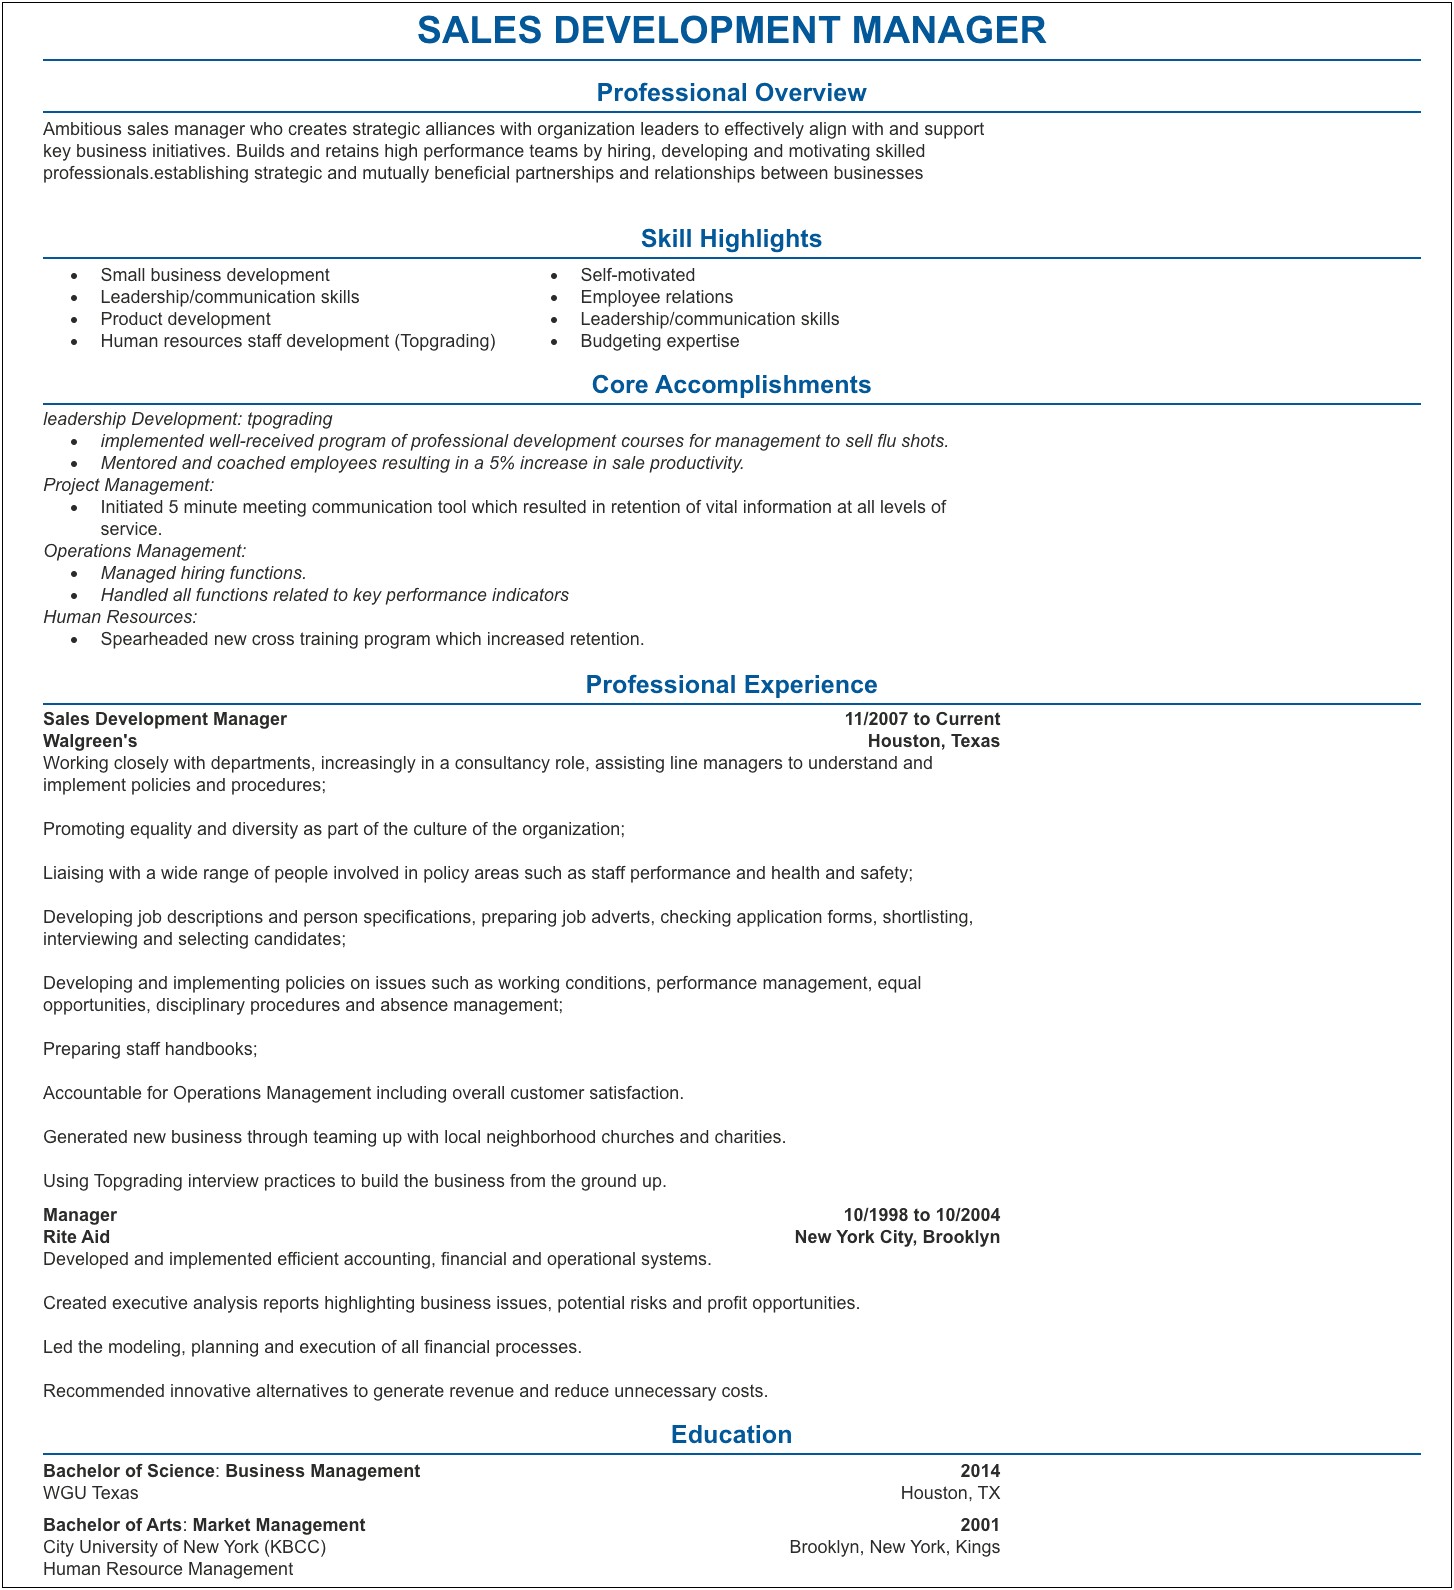 Resume For Management Position Objective